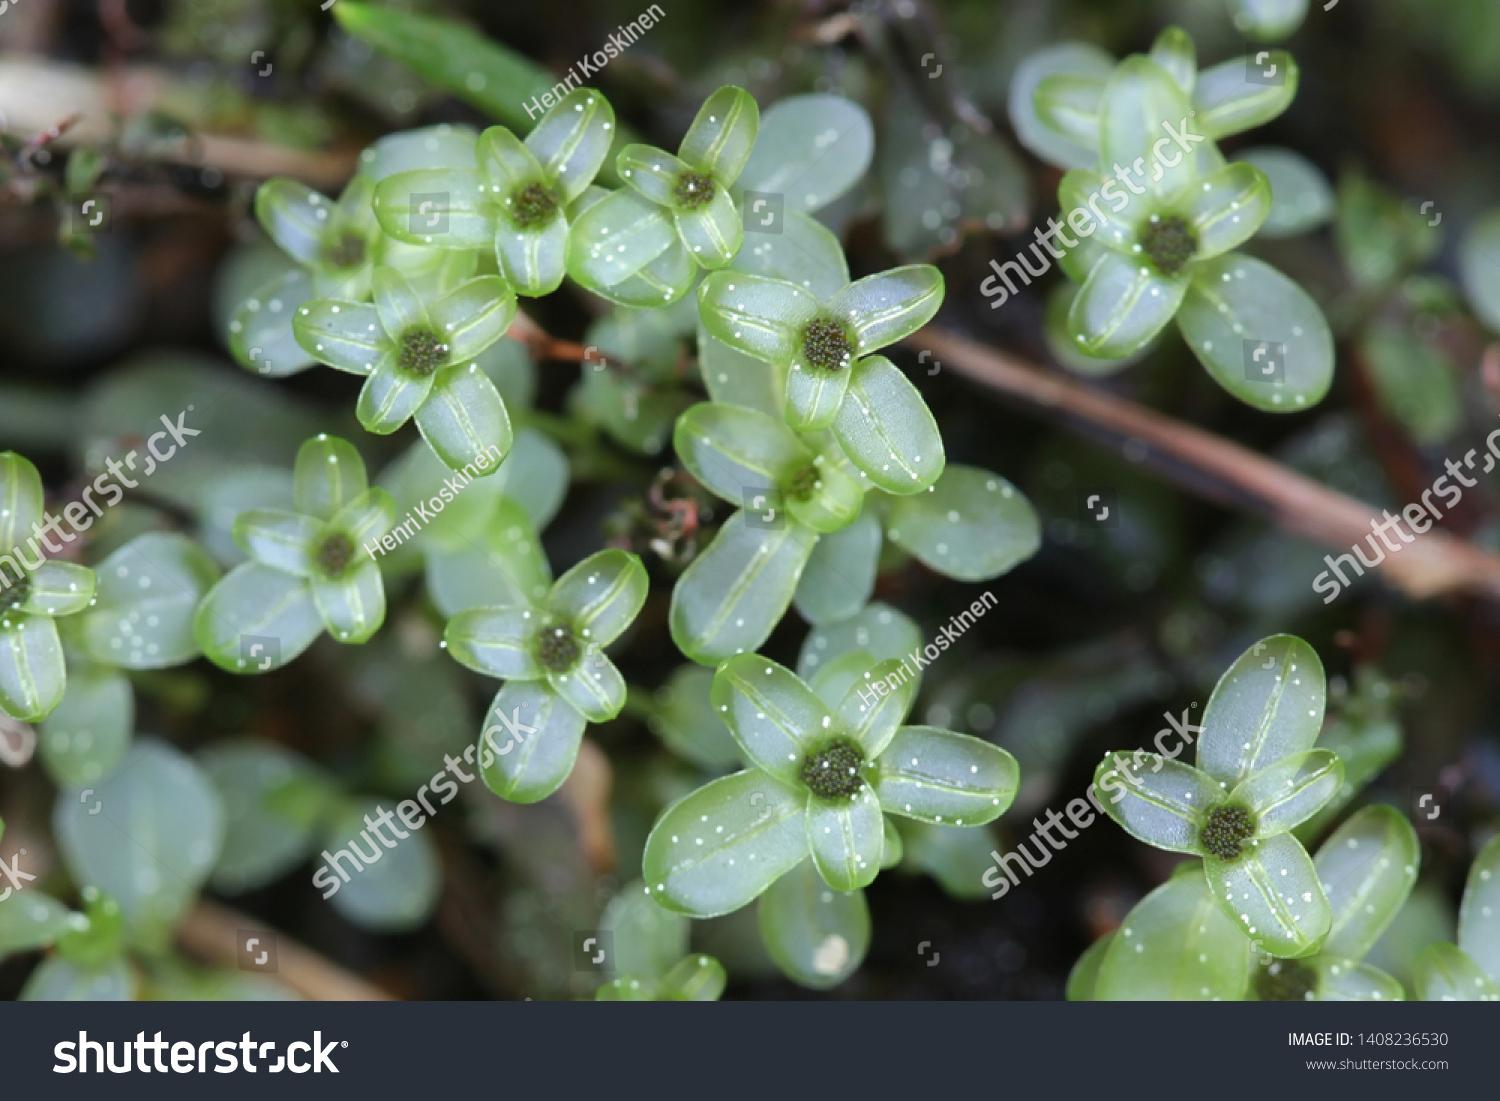 stock-photo-rhizomnium-punctatum-known-as-dotted-thyme-moss-or-red-penny-moss-1408236530.jpg